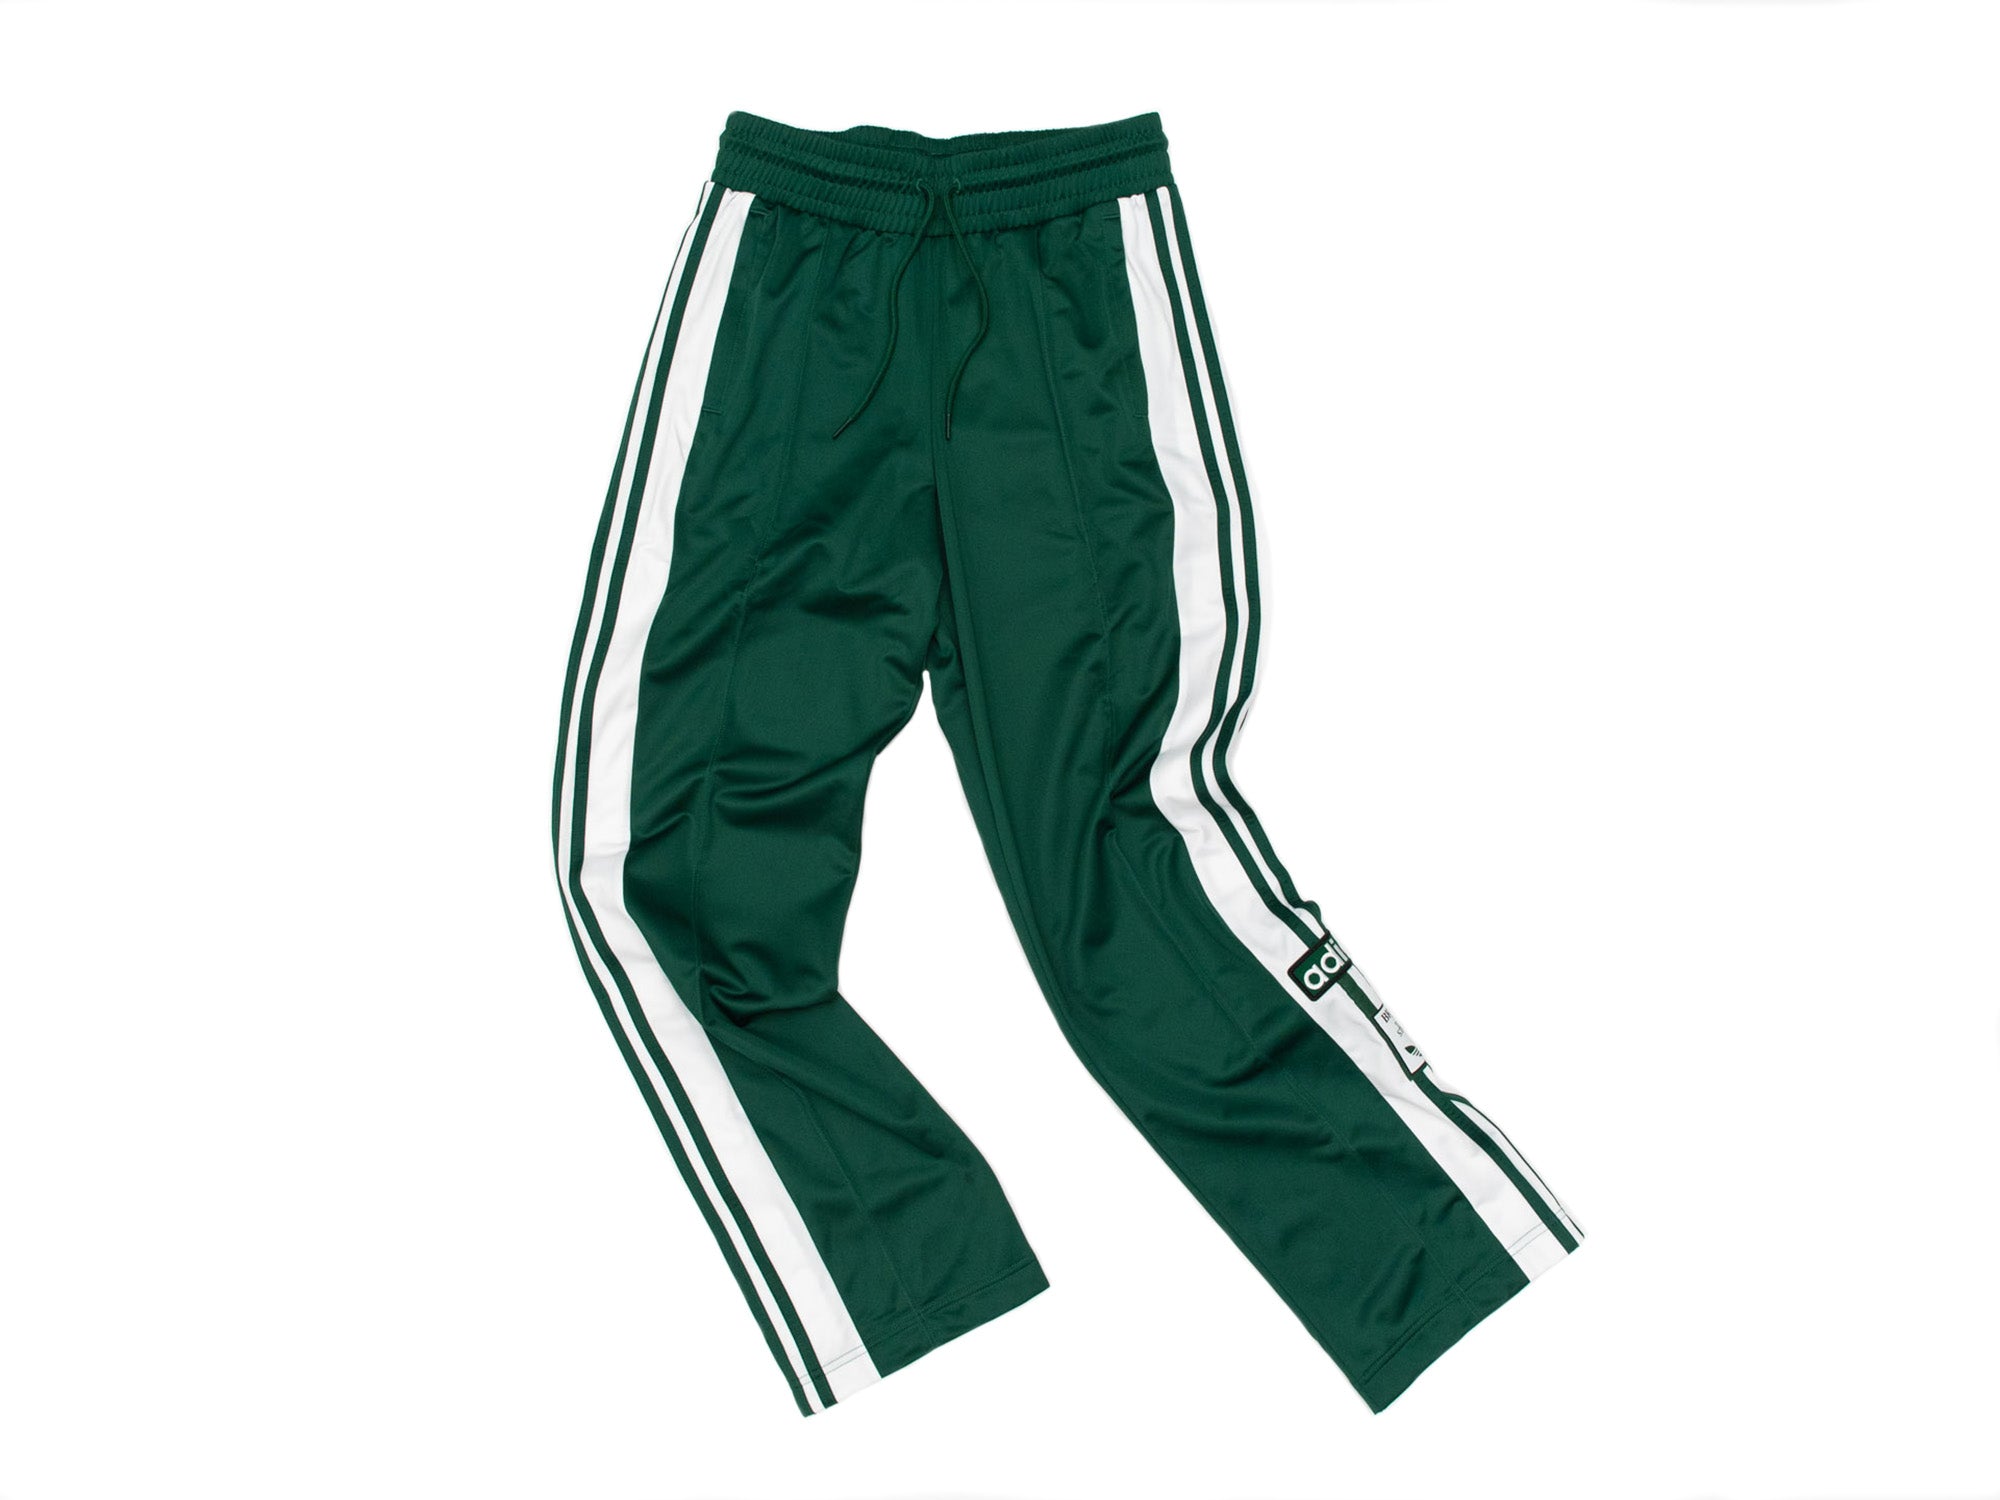 Adidas Firebird Track Pants Scarlet Red - Adidas At 80s Casual Classics